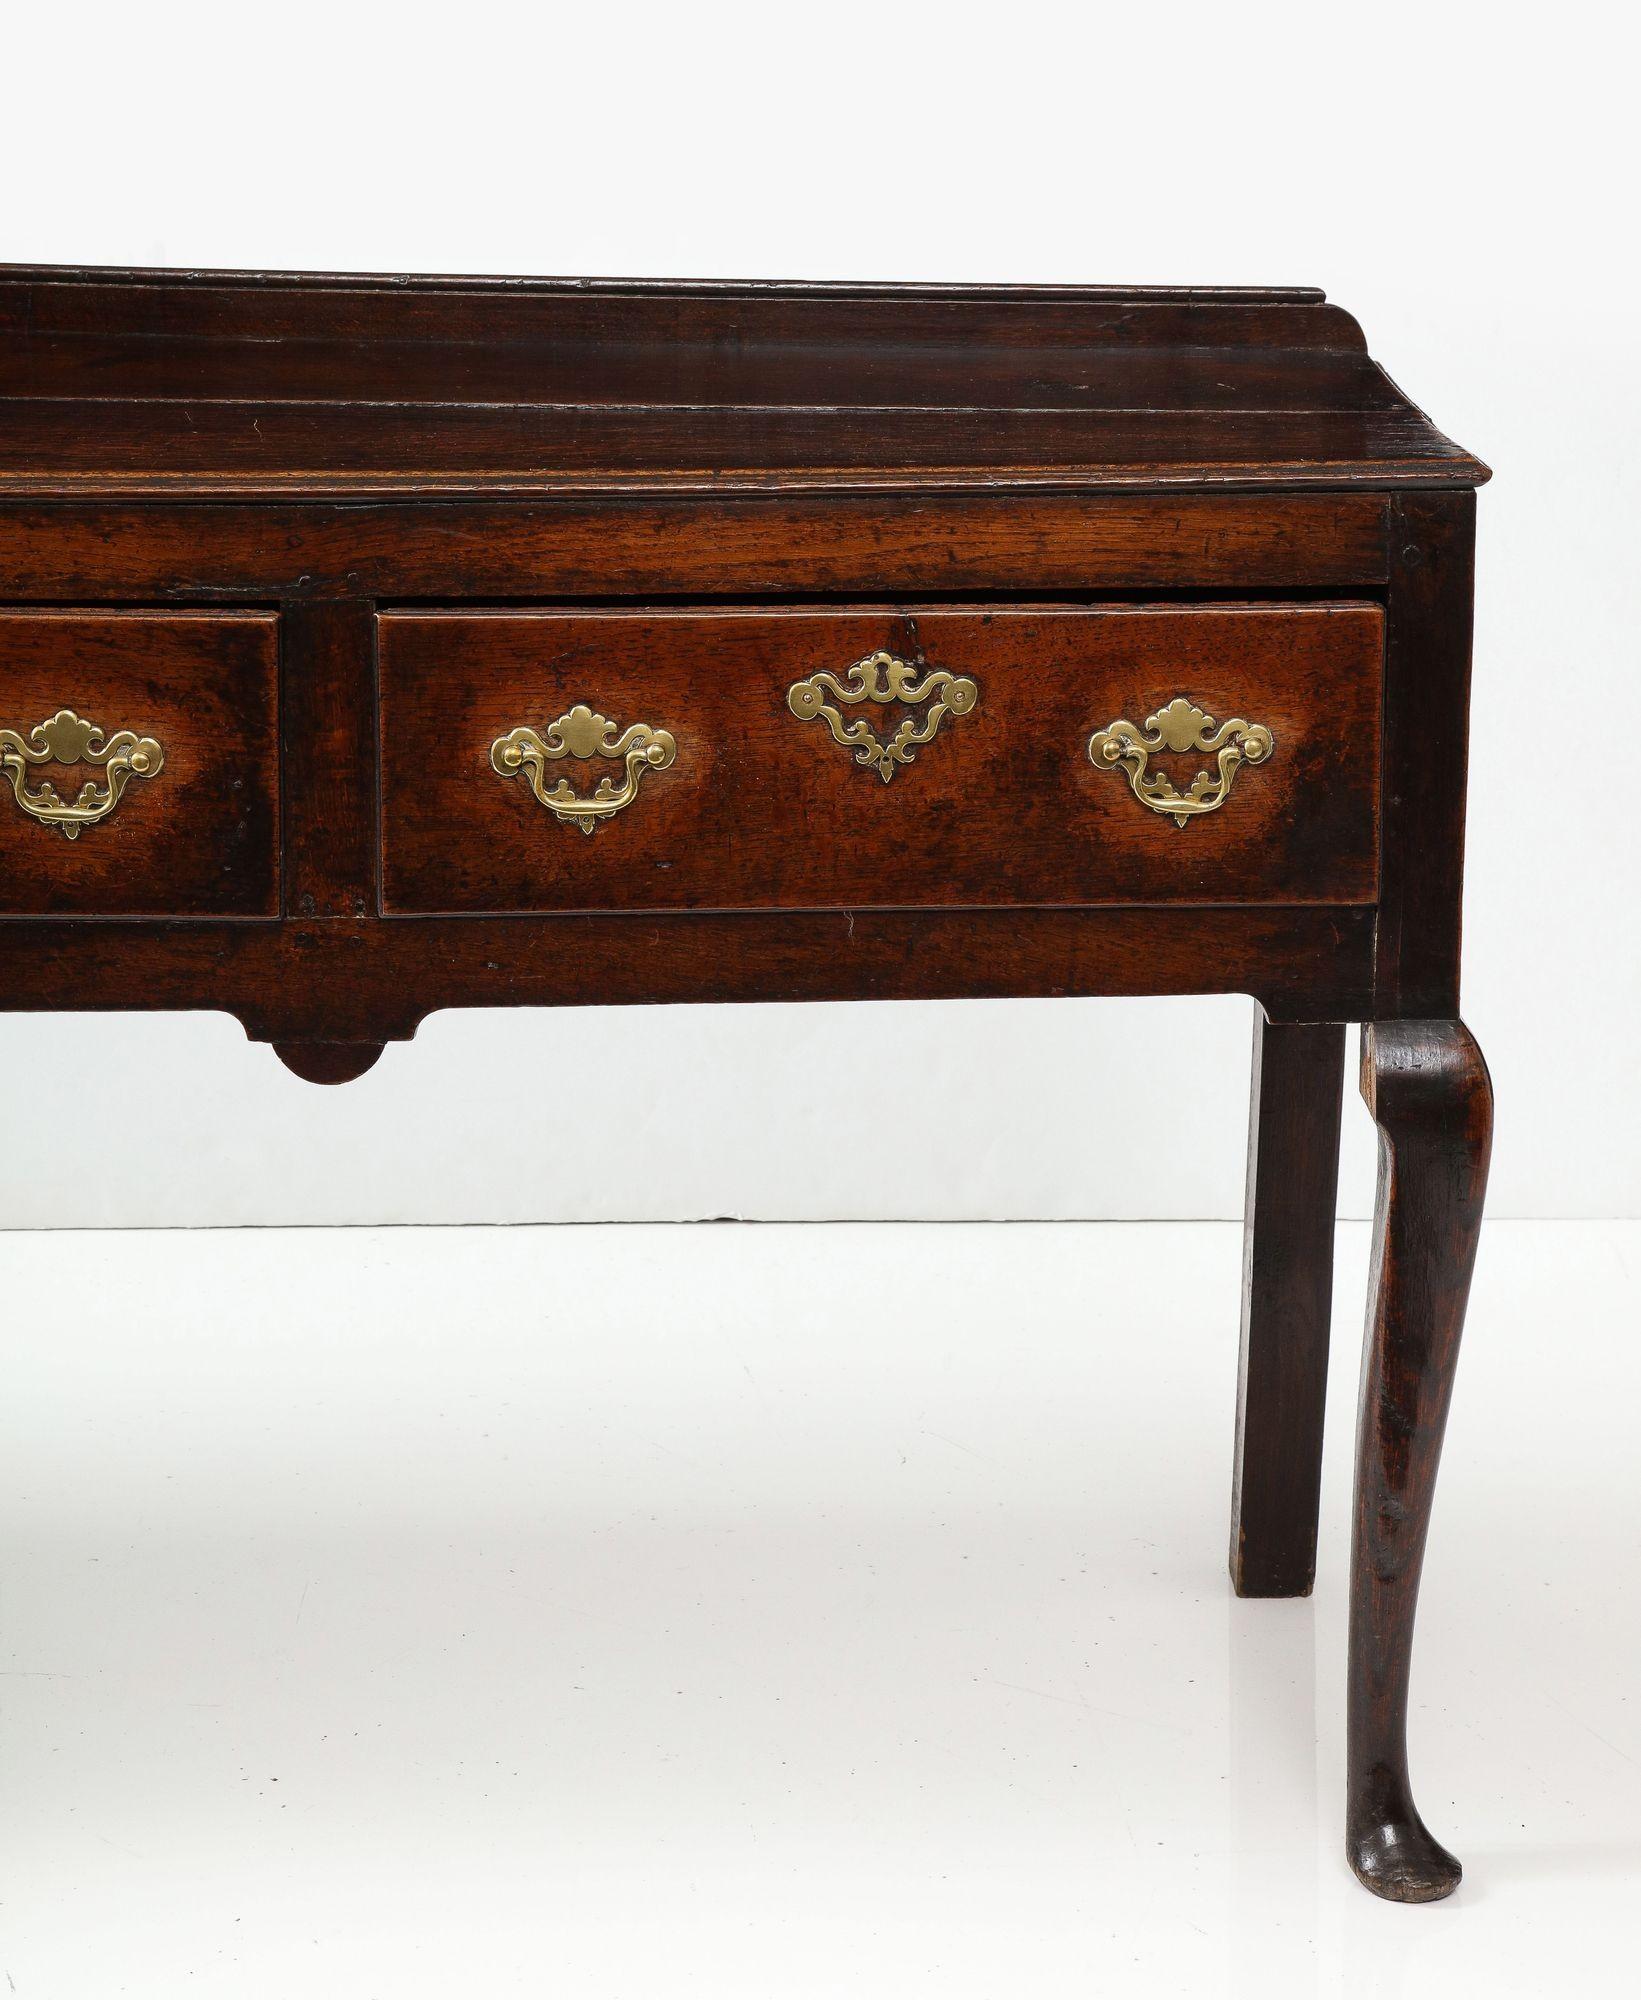 Fine early 18th century Welsh low dresser, the molded top with shallow backsplash, over three drawers with scalloped drops along straight apron and standing on graceful cabriole legs, the whole possessing fantastically rich patination, great scale